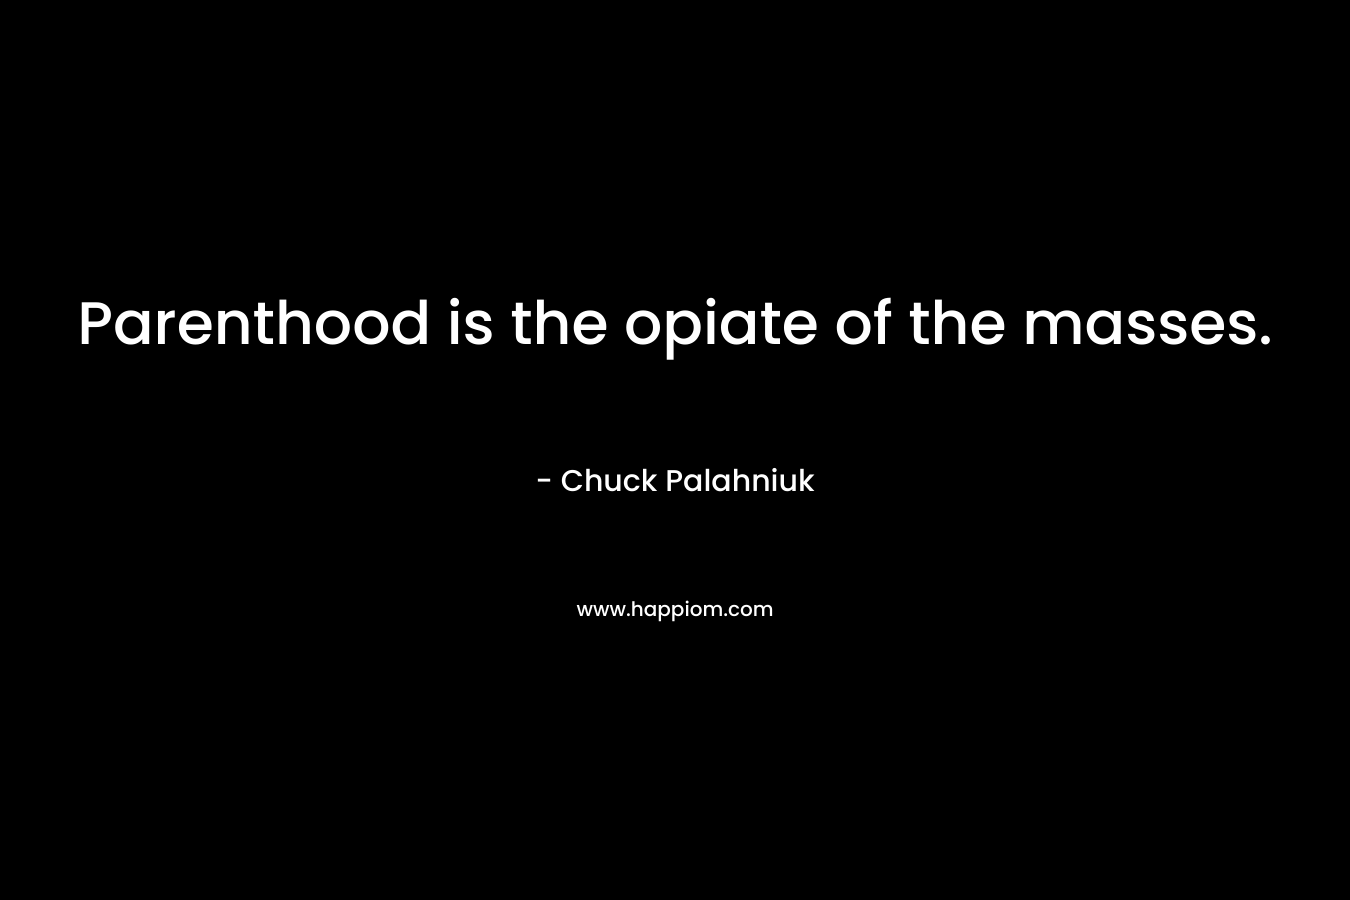 Parenthood is the opiate of the masses.